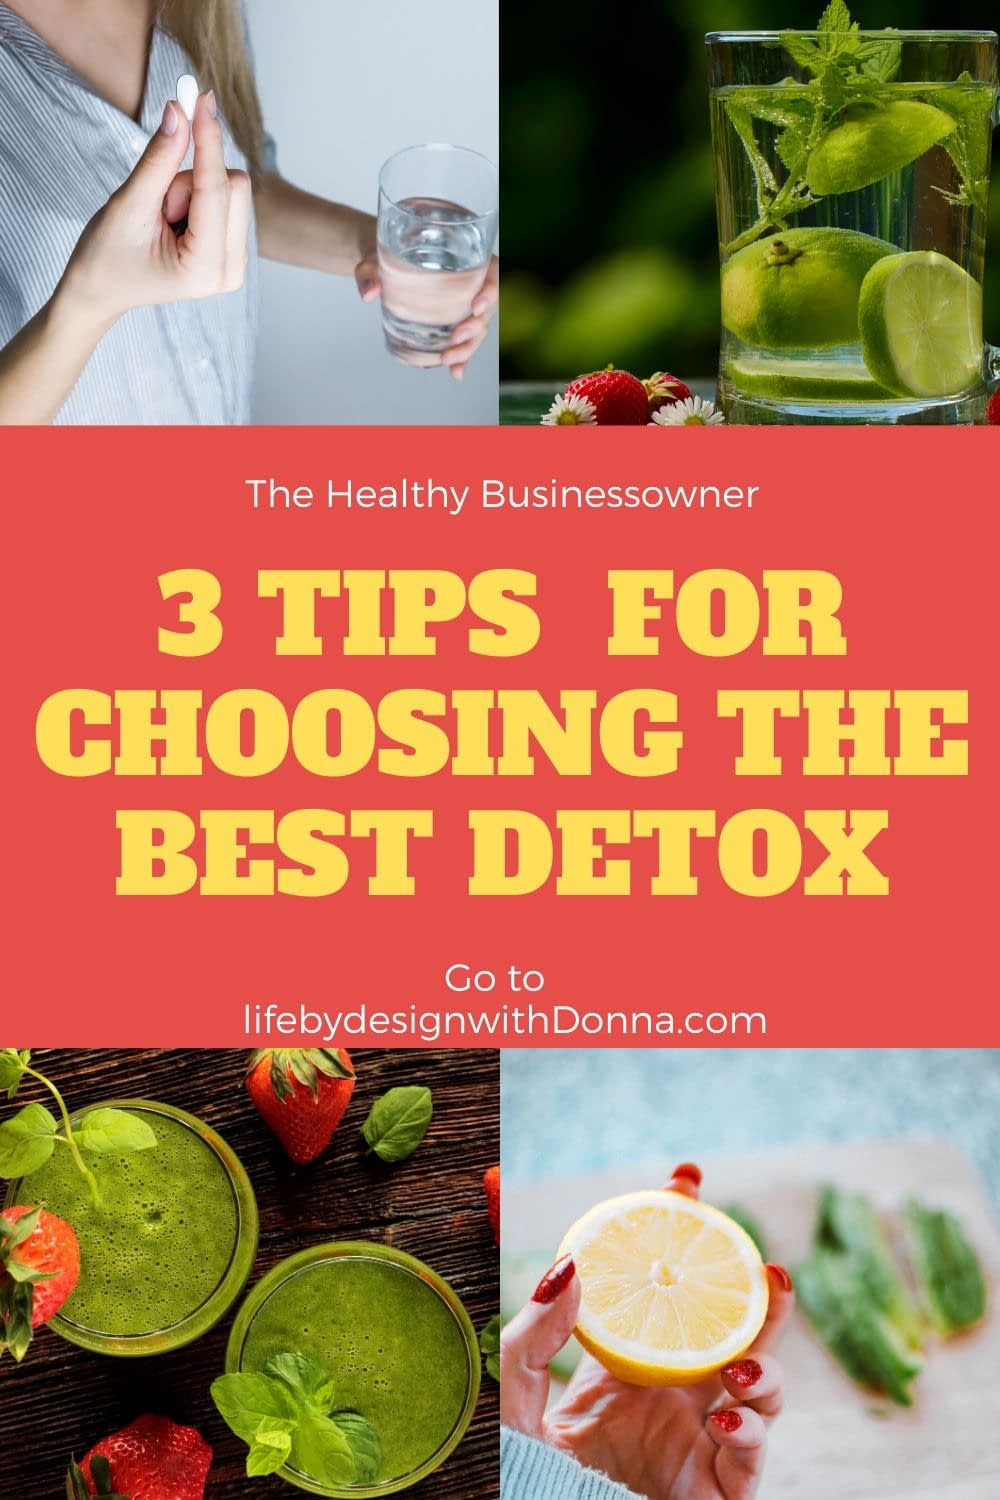 3 Top Factors To Consider When Choosing The Best Detox For You